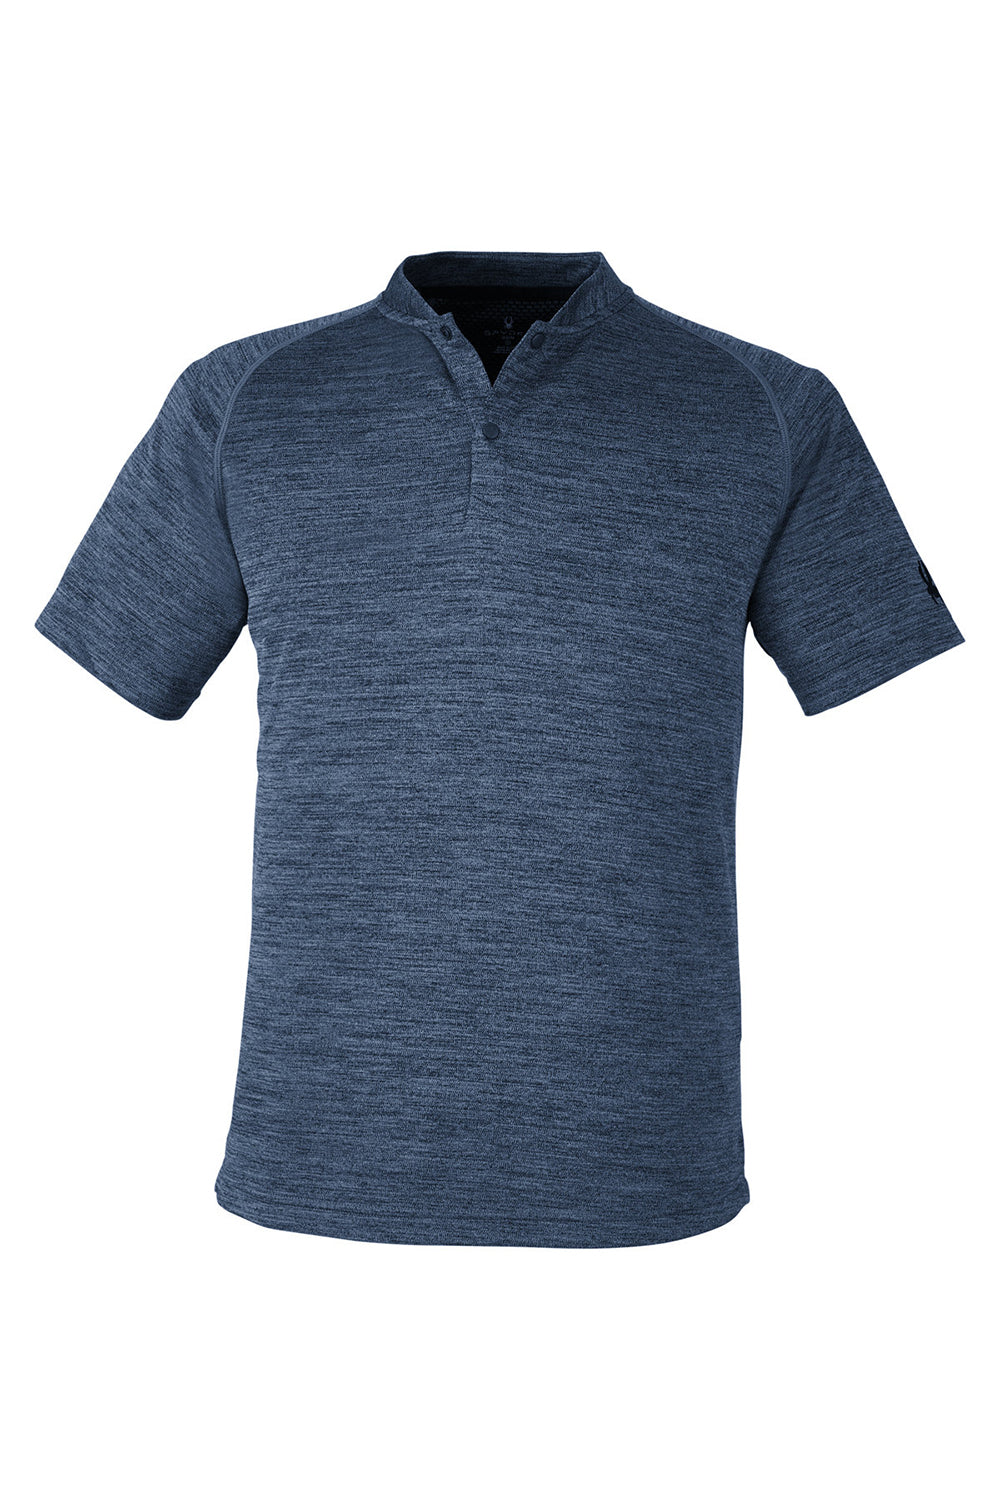 Spyder S17979 Mens Mission Blade Short Sleeve Polo Shirt Frontier Blue Flat Front